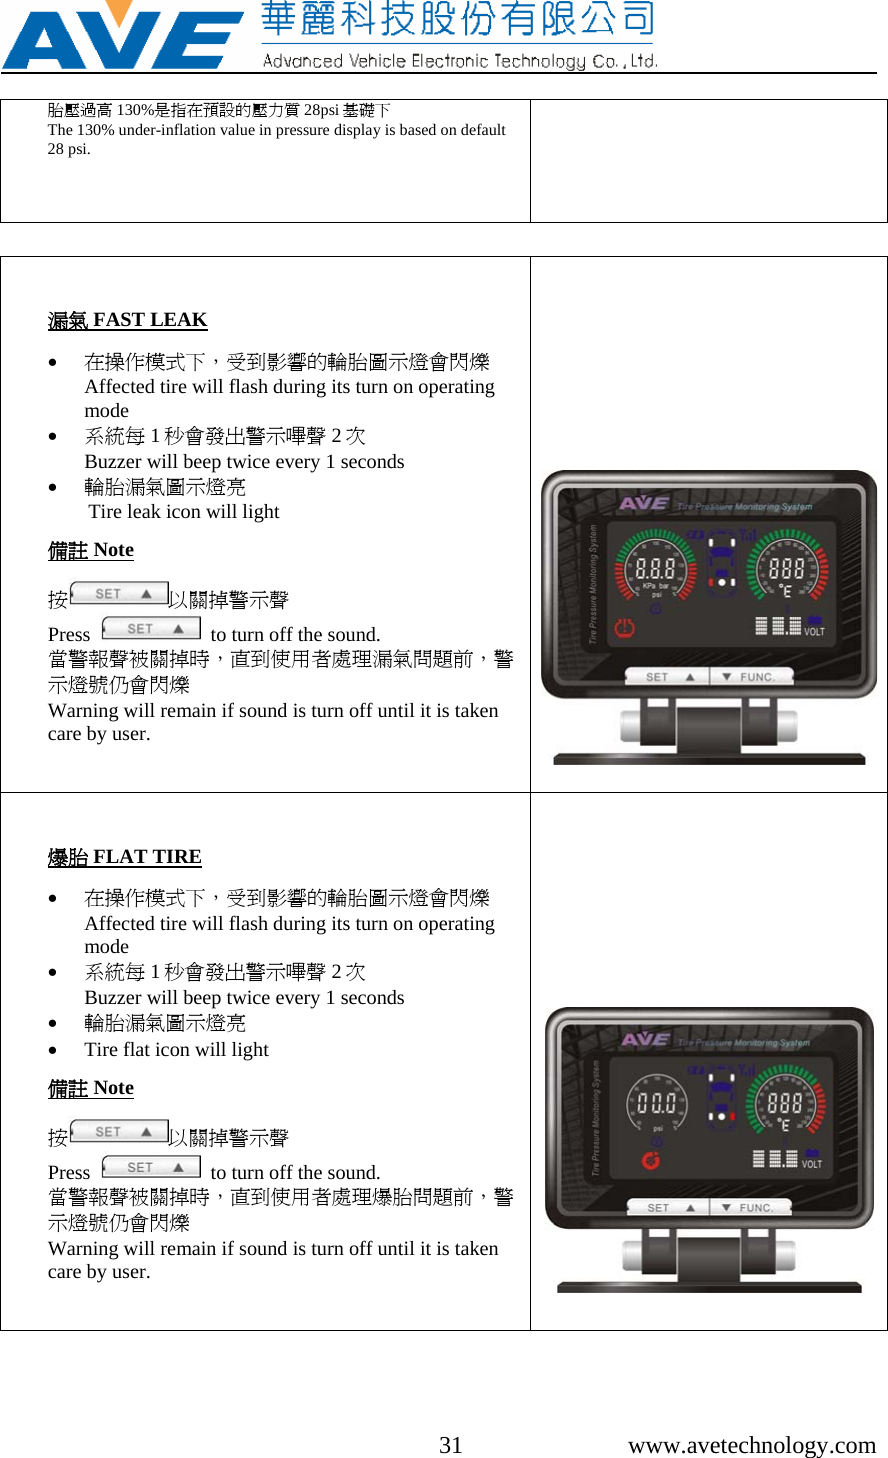     31 www.avetechnology.com 胎壓過高 130%是指在預設的壓力質 28psi 基礎下                          The 130% under-inflation value in pressure display is based on default 28 psi.       漏氣 FAST LEAK  • 在操作模式下，受到影響的輪胎圖示燈會閃爍Affected tire will flash during its turn on operating mode • 系統每 1秒會發出警示嗶聲 2次                                Buzzer will beep twice every 1 seconds • 輪胎漏氣圖示燈亮 Tire leak icon will light  備註 Note  按以關掉警示聲 Press     to turn off the sound. 當警報聲被關掉時，直到使用者處理漏氣問題前，警示燈號仍會閃爍 Warning will remain if sound is turn off until it is taken care by user.      爆胎 FLAT TIRE  • 在操作模式下，受到影響的輪胎圖示燈會閃爍Affected tire will flash during its turn on operating mode • 系統每 1秒會發出警示嗶聲 2次                                 Buzzer will beep twice every 1 seconds • 輪胎漏氣圖示燈亮 • Tire flat icon will light  備註 Note  按以關掉警示聲 Press     to turn off the sound. 當警報聲被關掉時，直到使用者處理爆胎問題前，警示燈號仍會閃爍 Warning will remain if sound is turn off until it is taken care by user.     